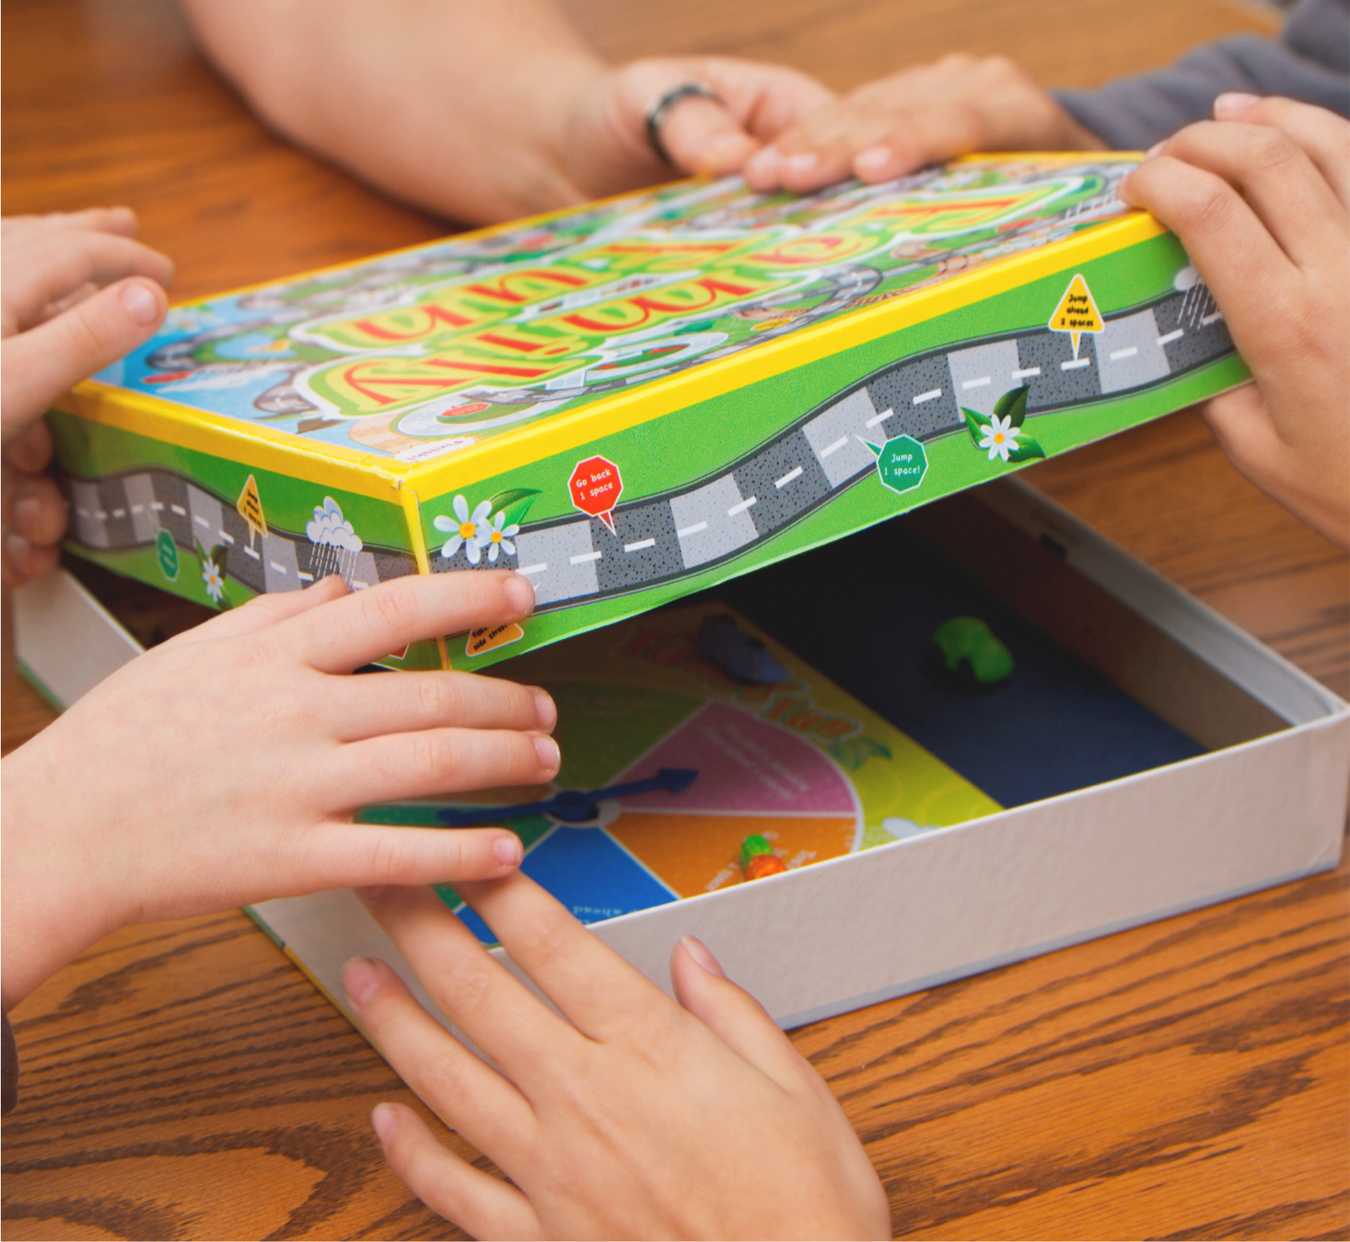 Games and puzzles create the opportunity to spend family time together.